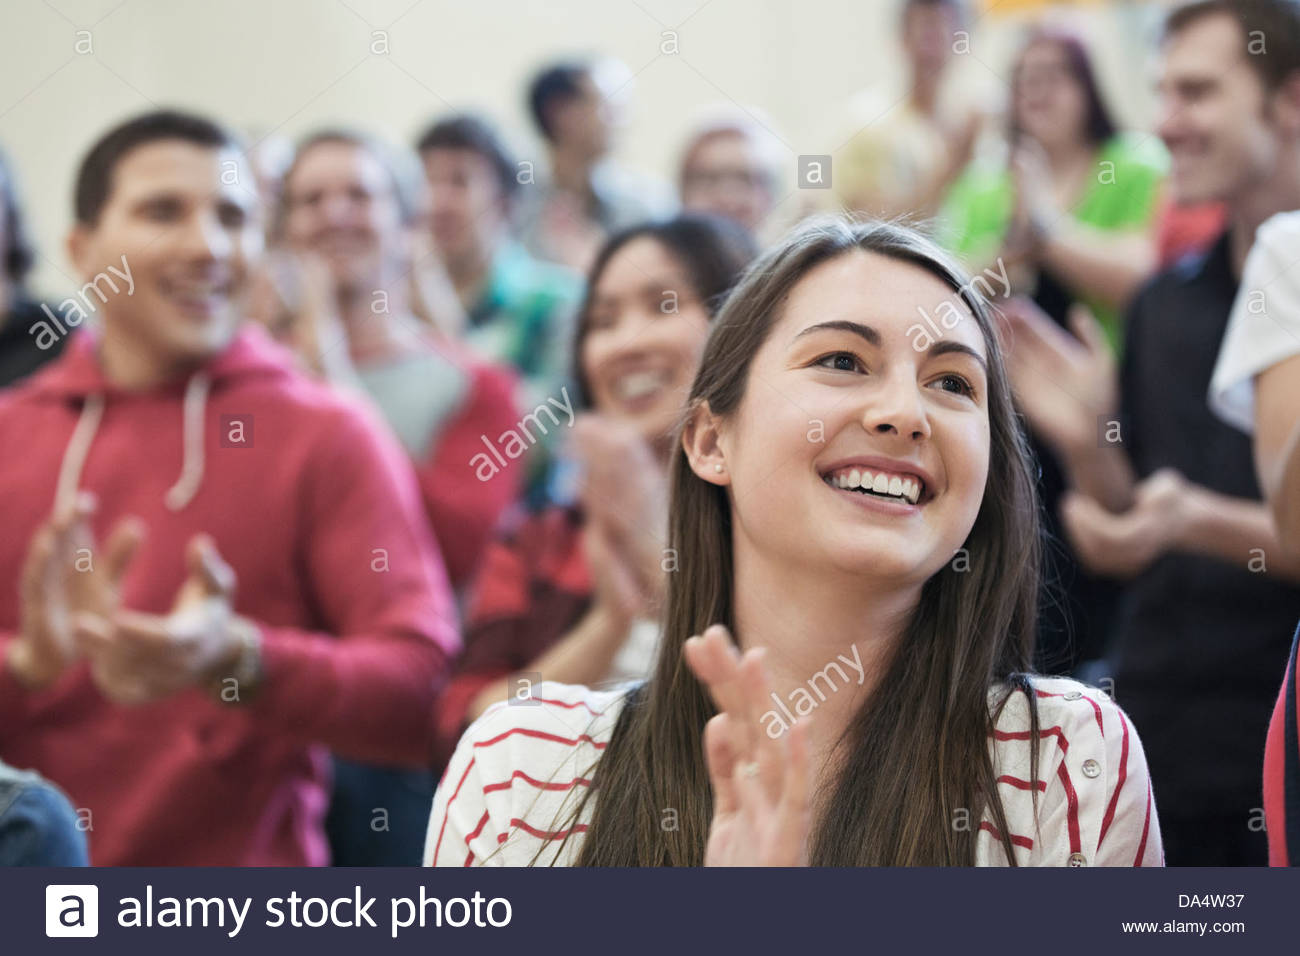 Female student clapping at college sporting event Stock Photo